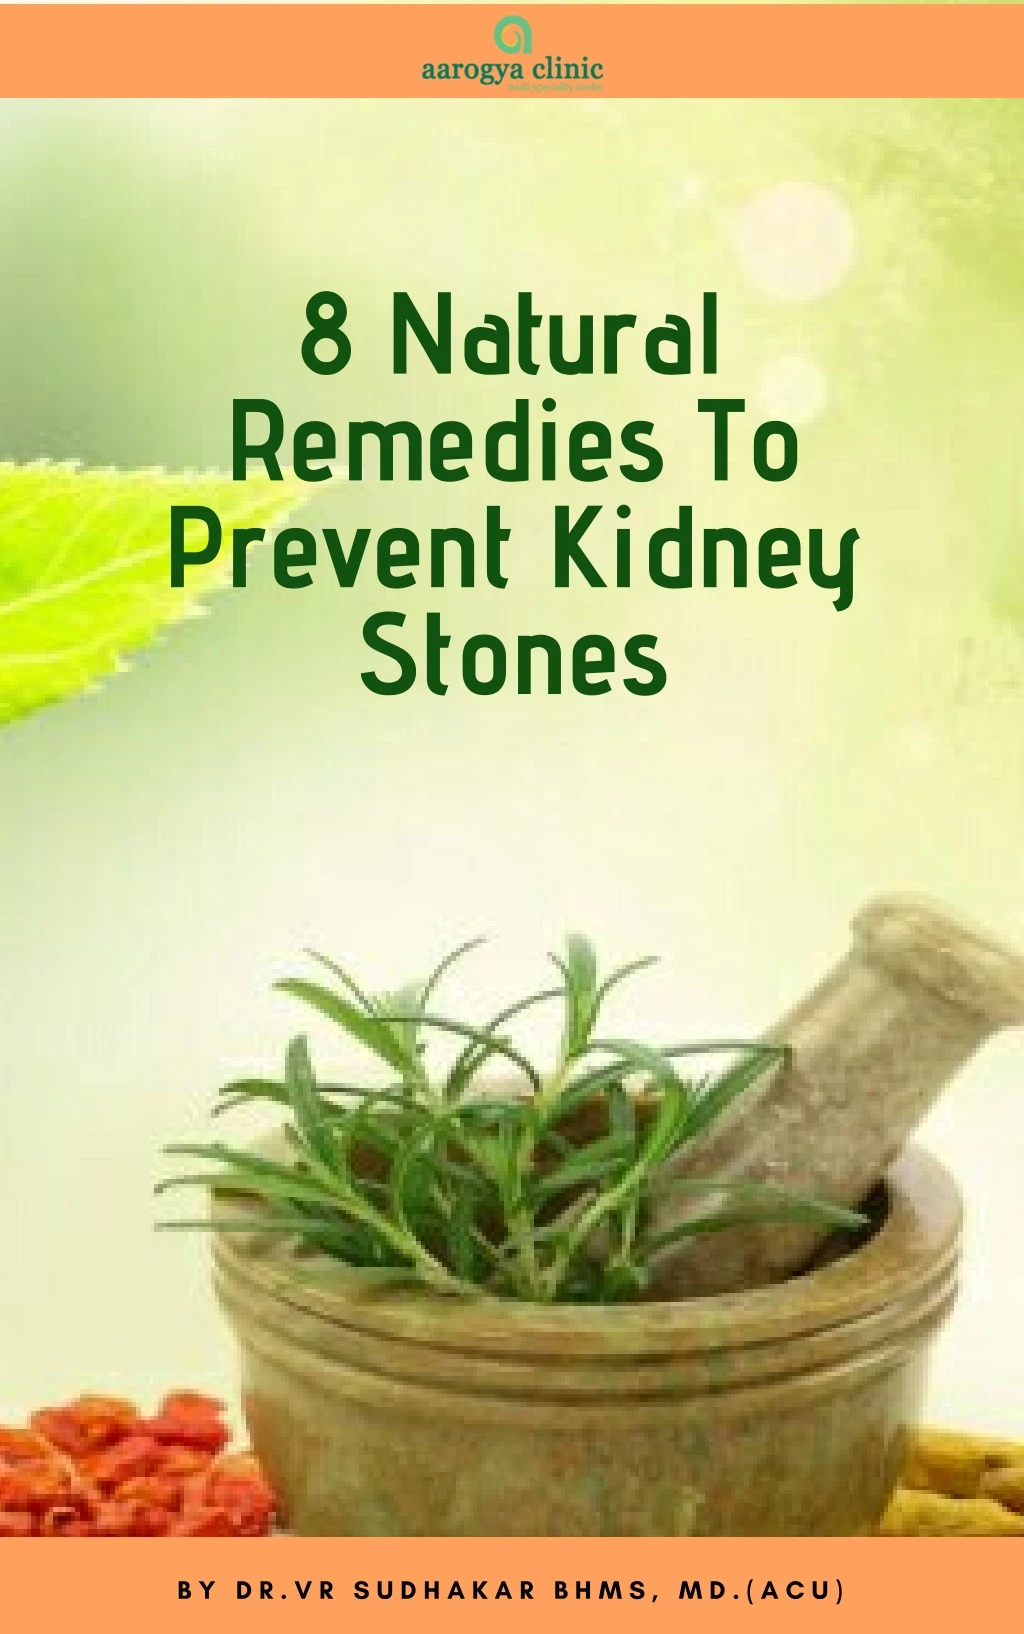 8 natural remedies to prevent kidney stones